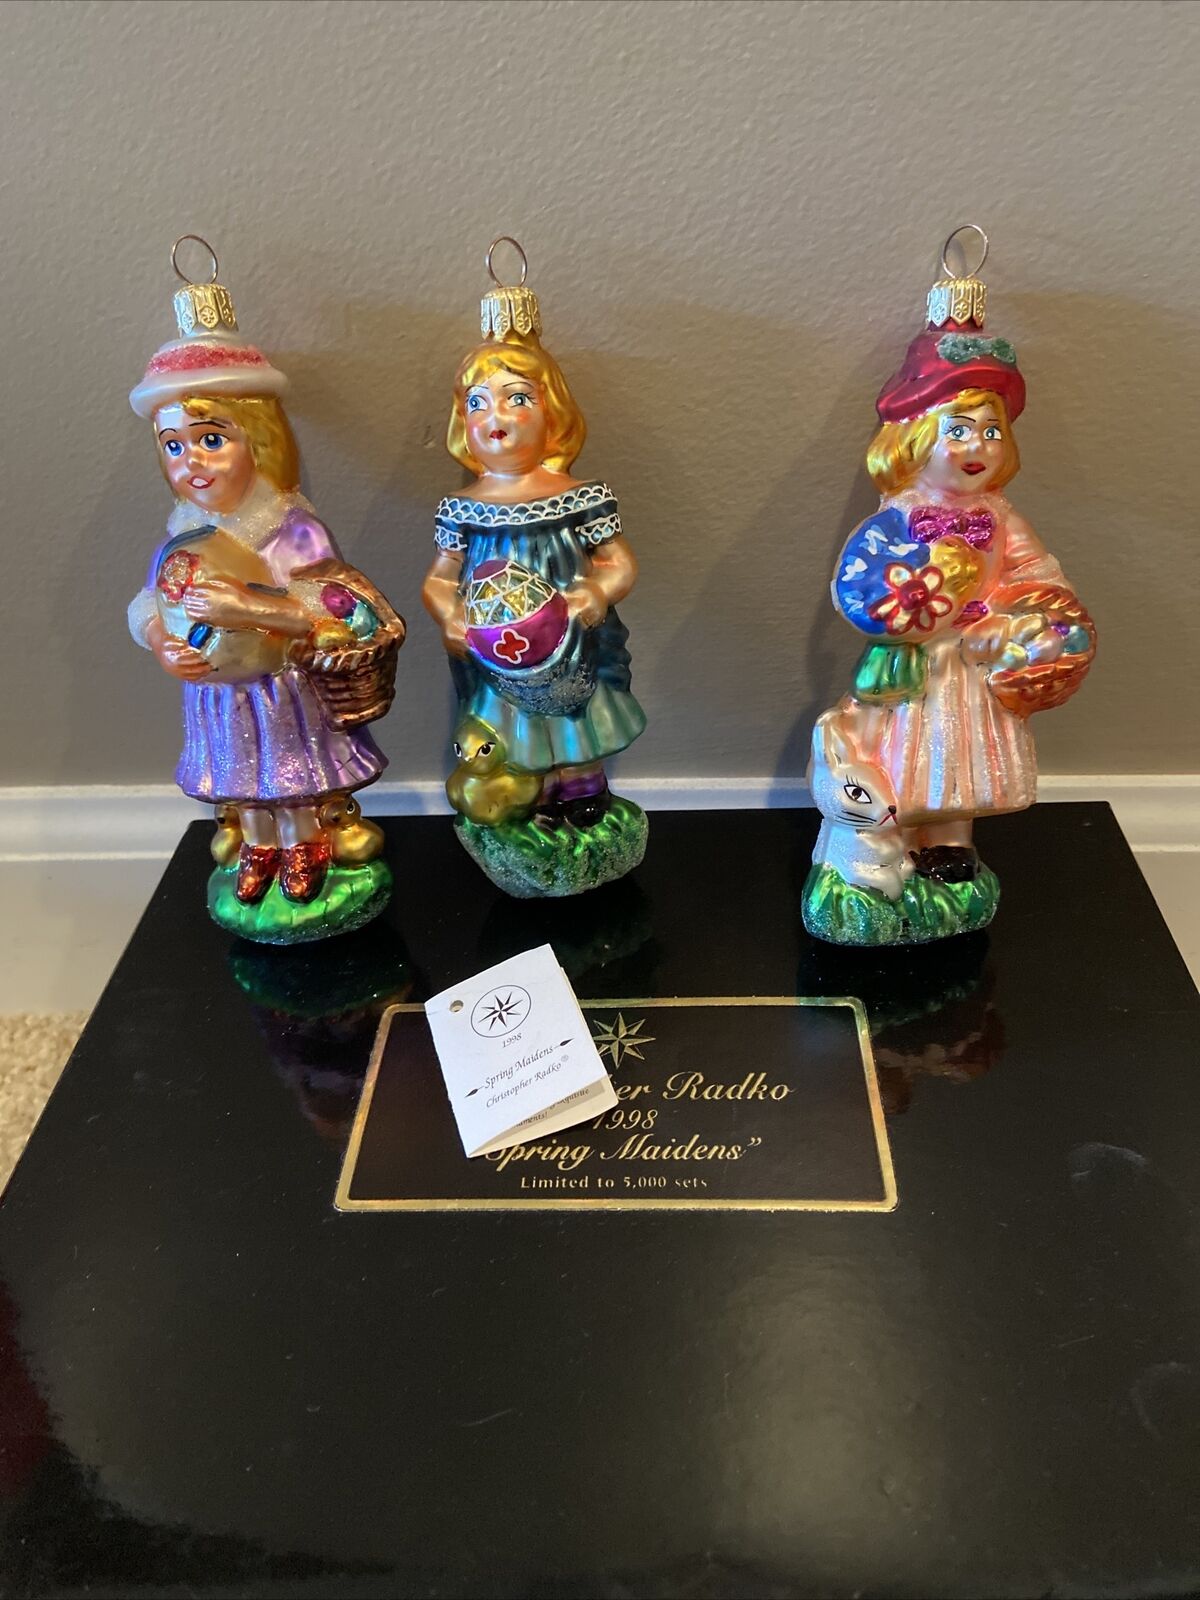 Christipher Radko Ornament ”Spring Maidens” Excellent condition with tag and box